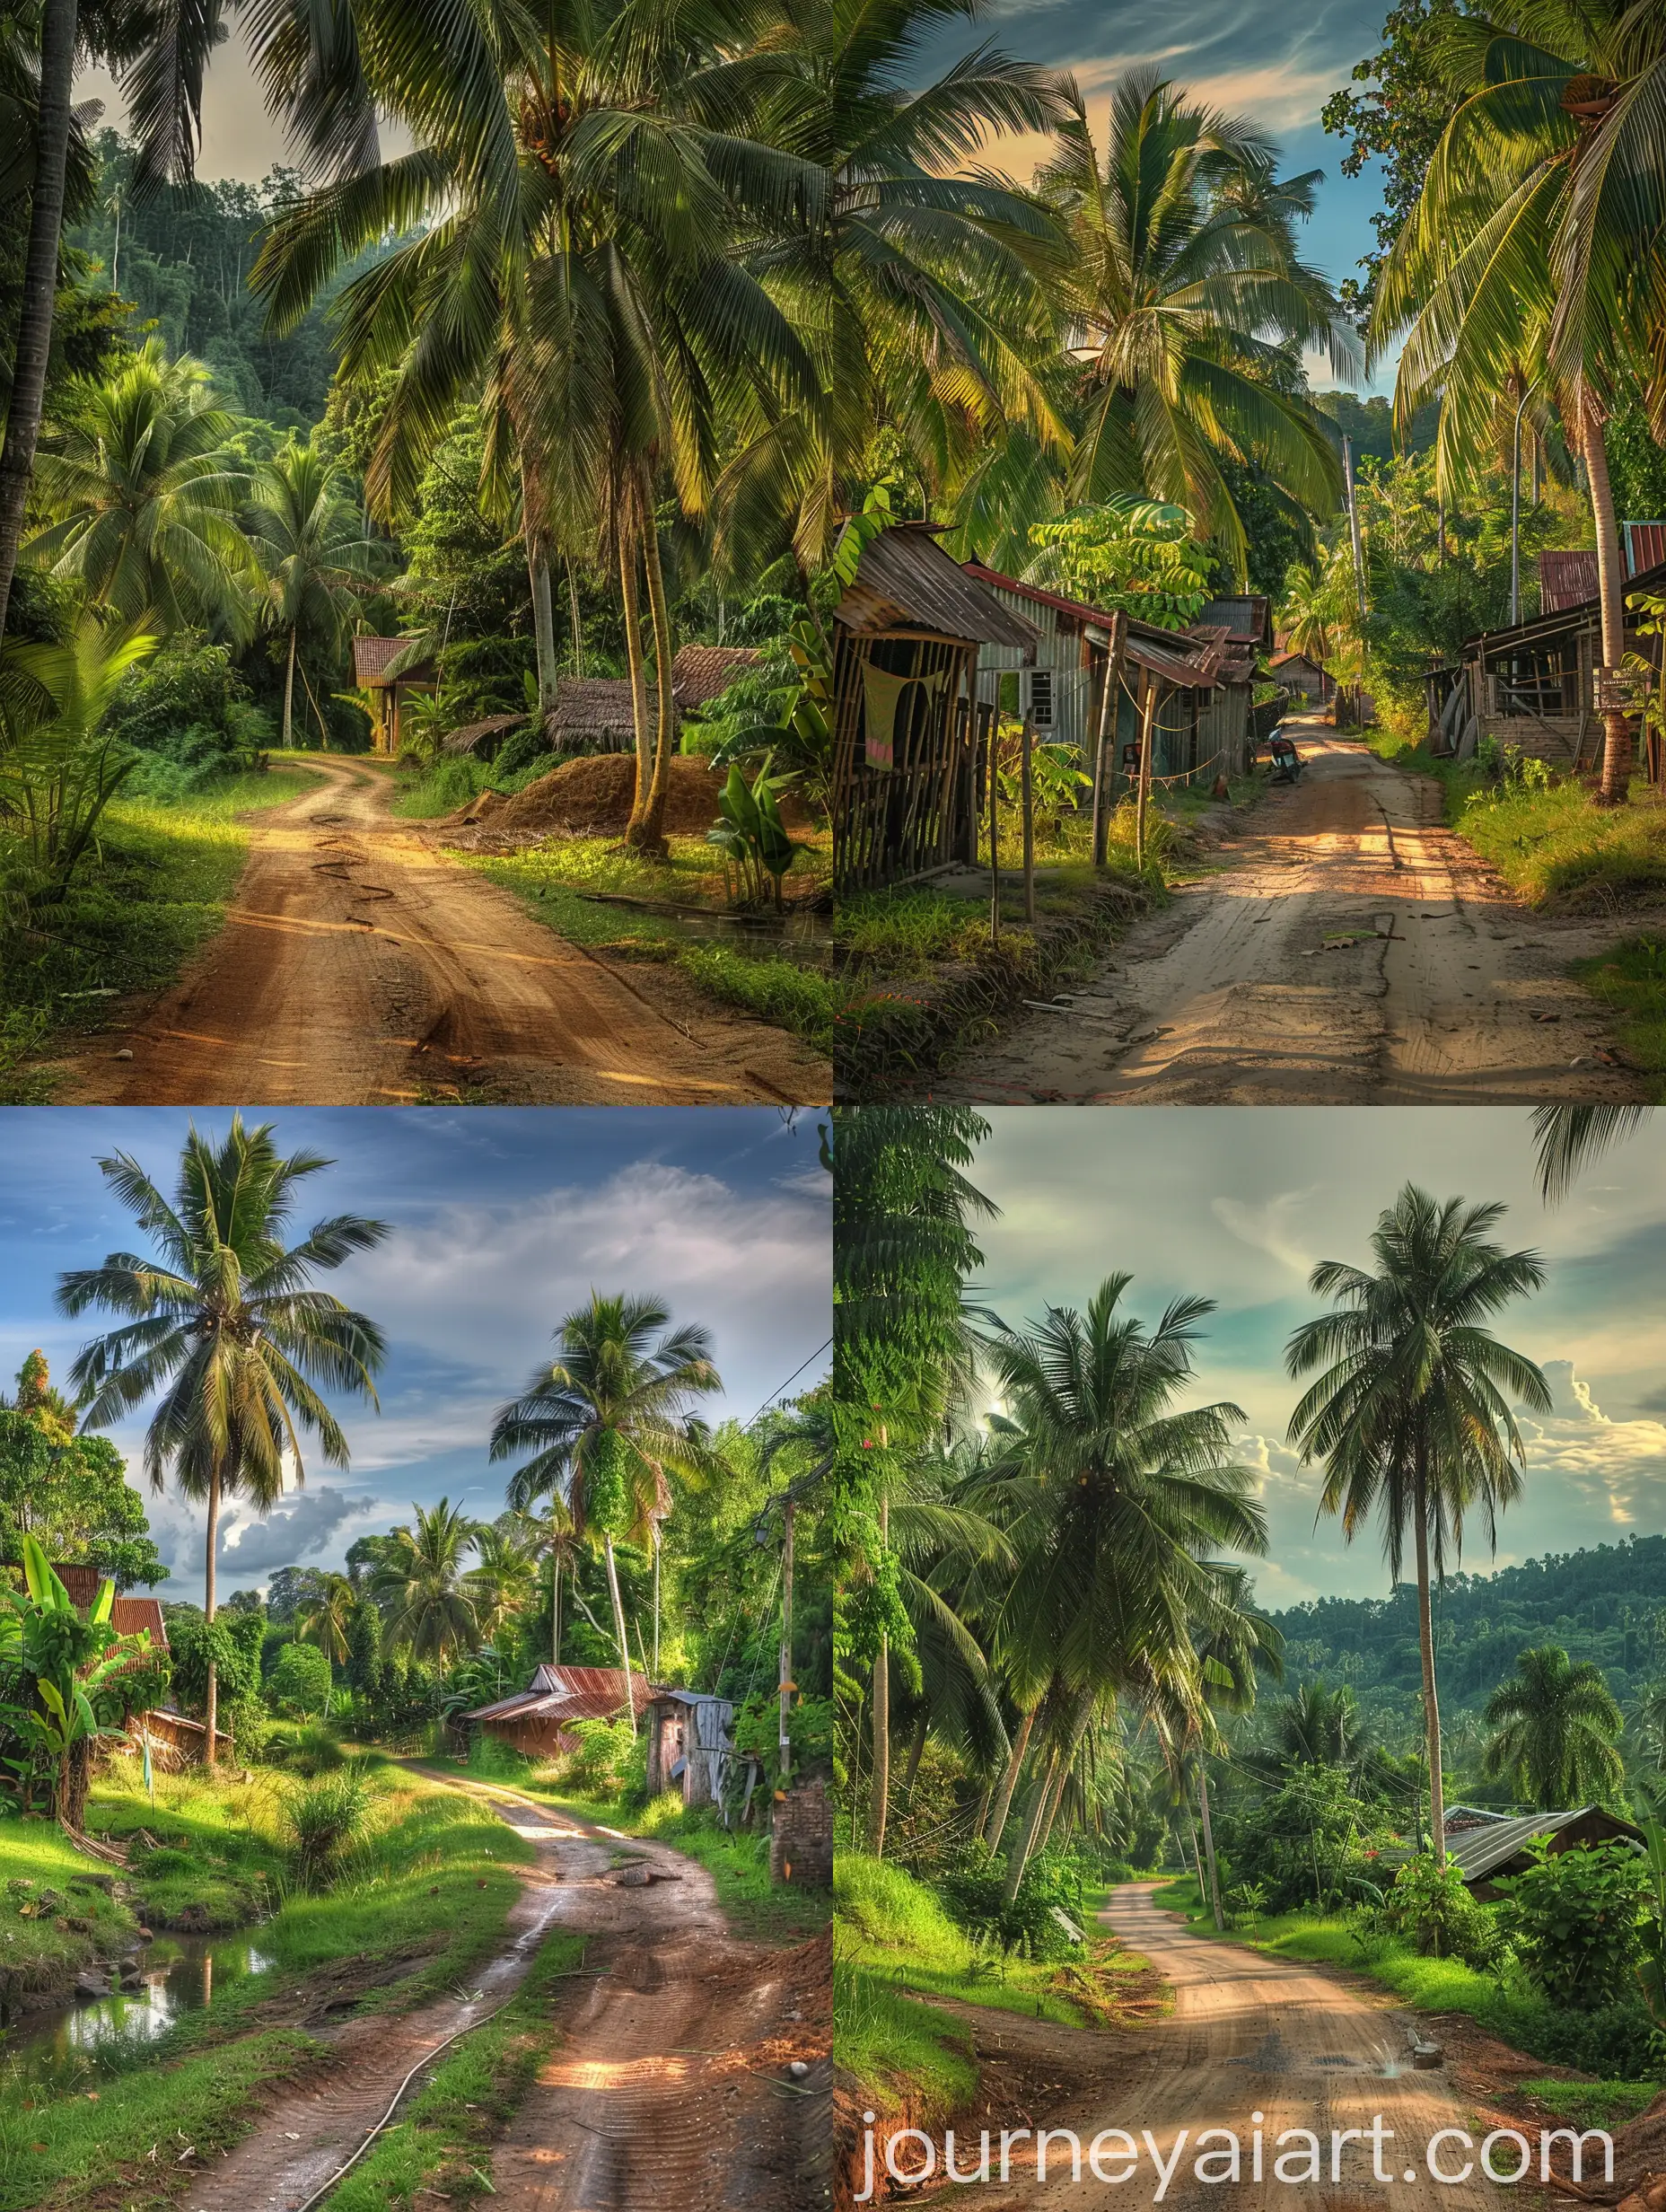 Hyperrealistic-Photograph-of-an-Old-Malay-Village-with-Coconut-Trees-and-Wildlife